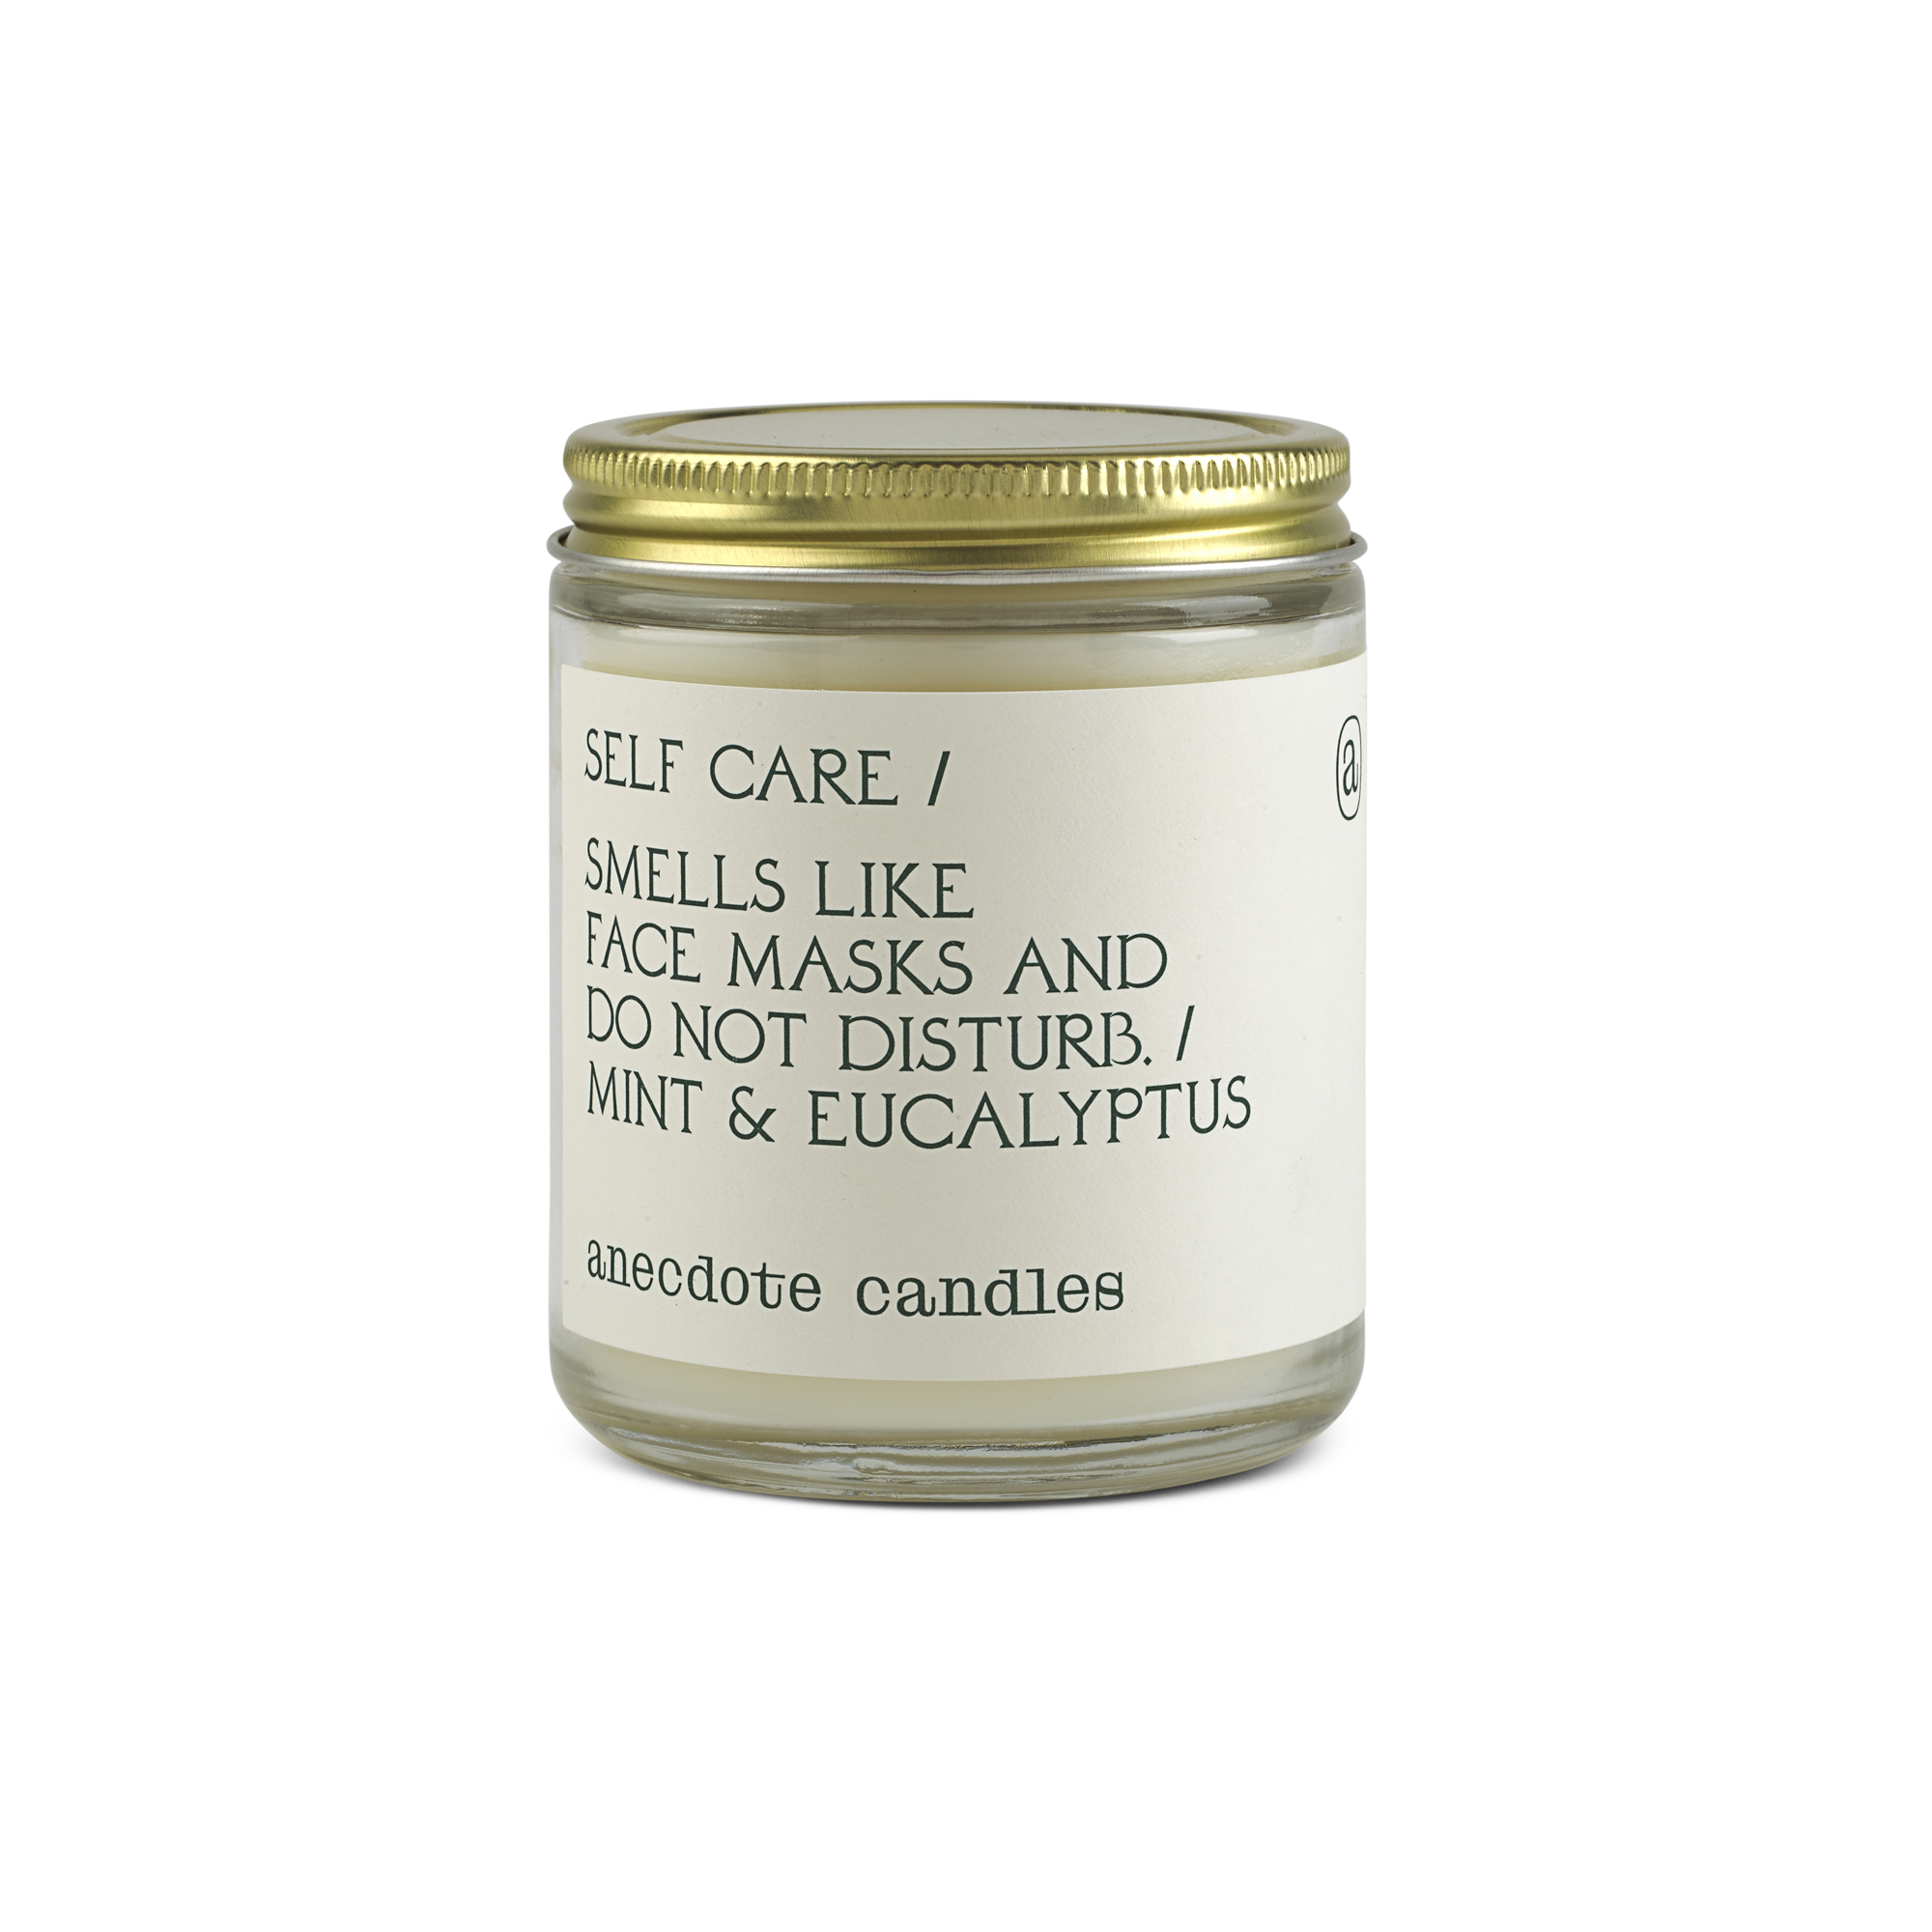 Self Care Candle by Anecdote Candles